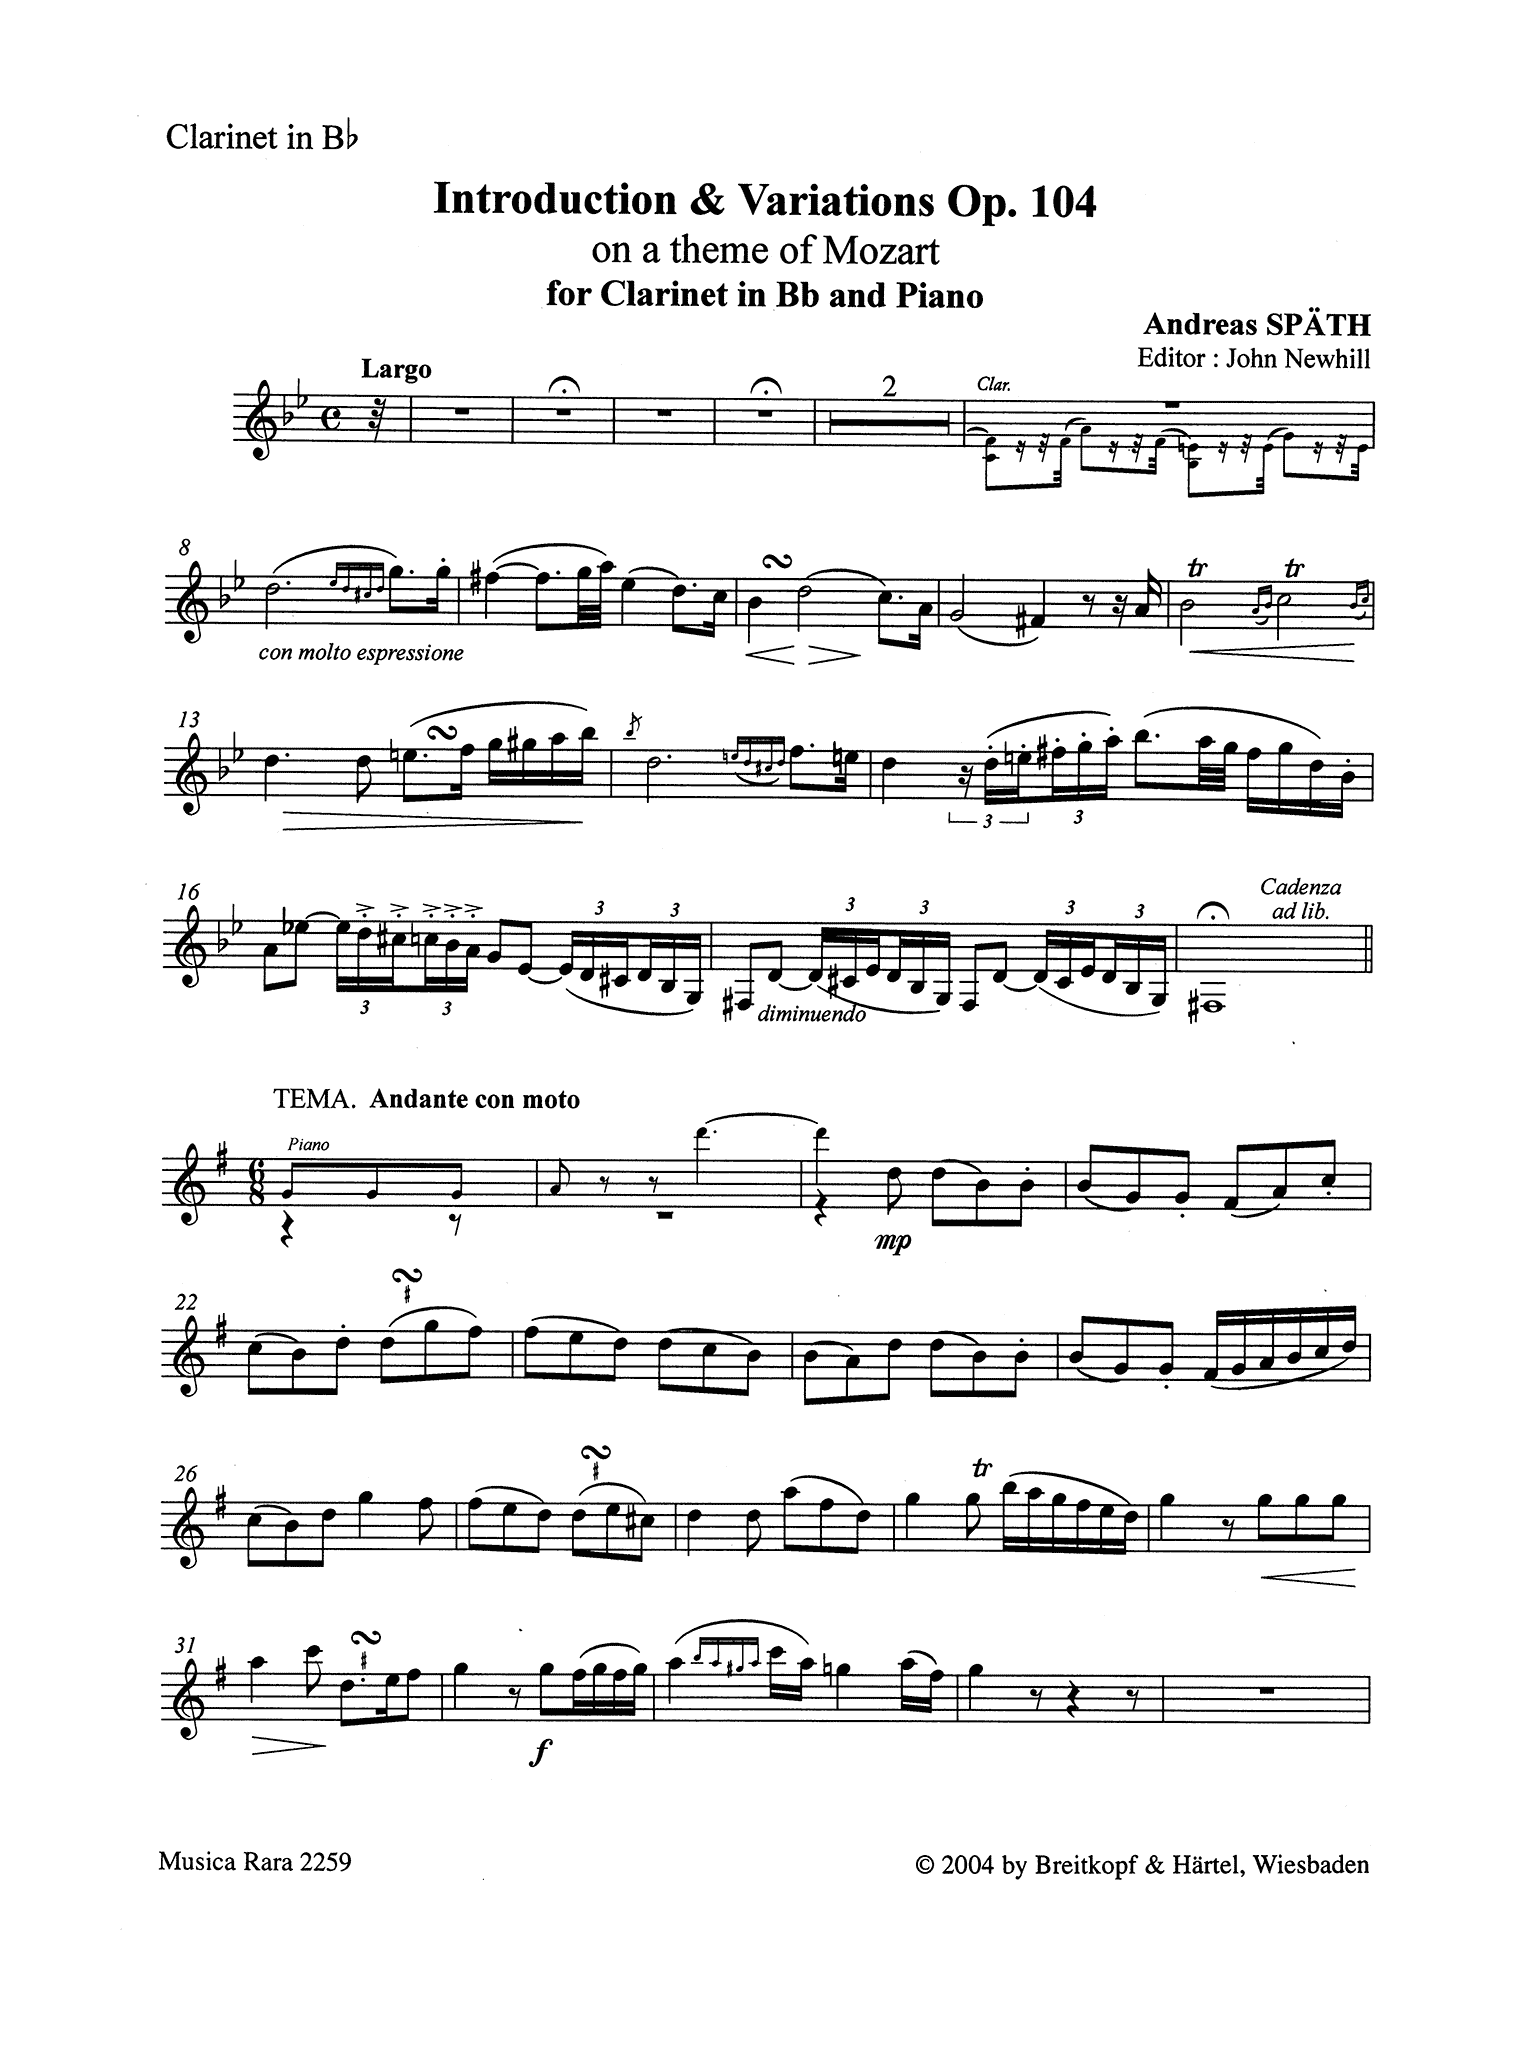 Spaeth Introduction & Variations on Mozart Magic Flute Theme Op. 104 Clarinet part